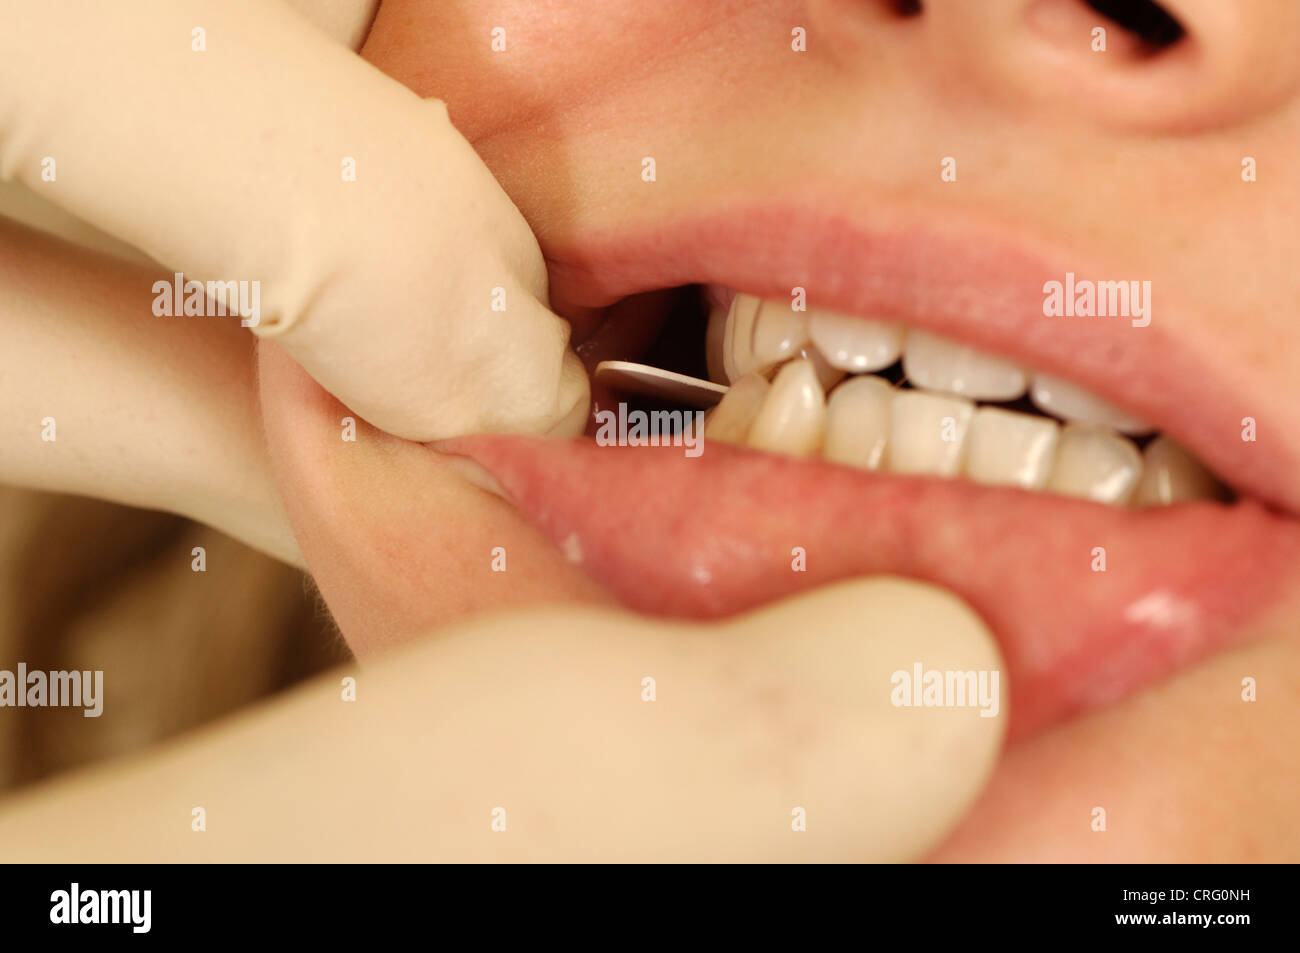 A young girl biting on the biting of a x-ray film before an image is taken of her teeth during a dental check-up. Stock Photo